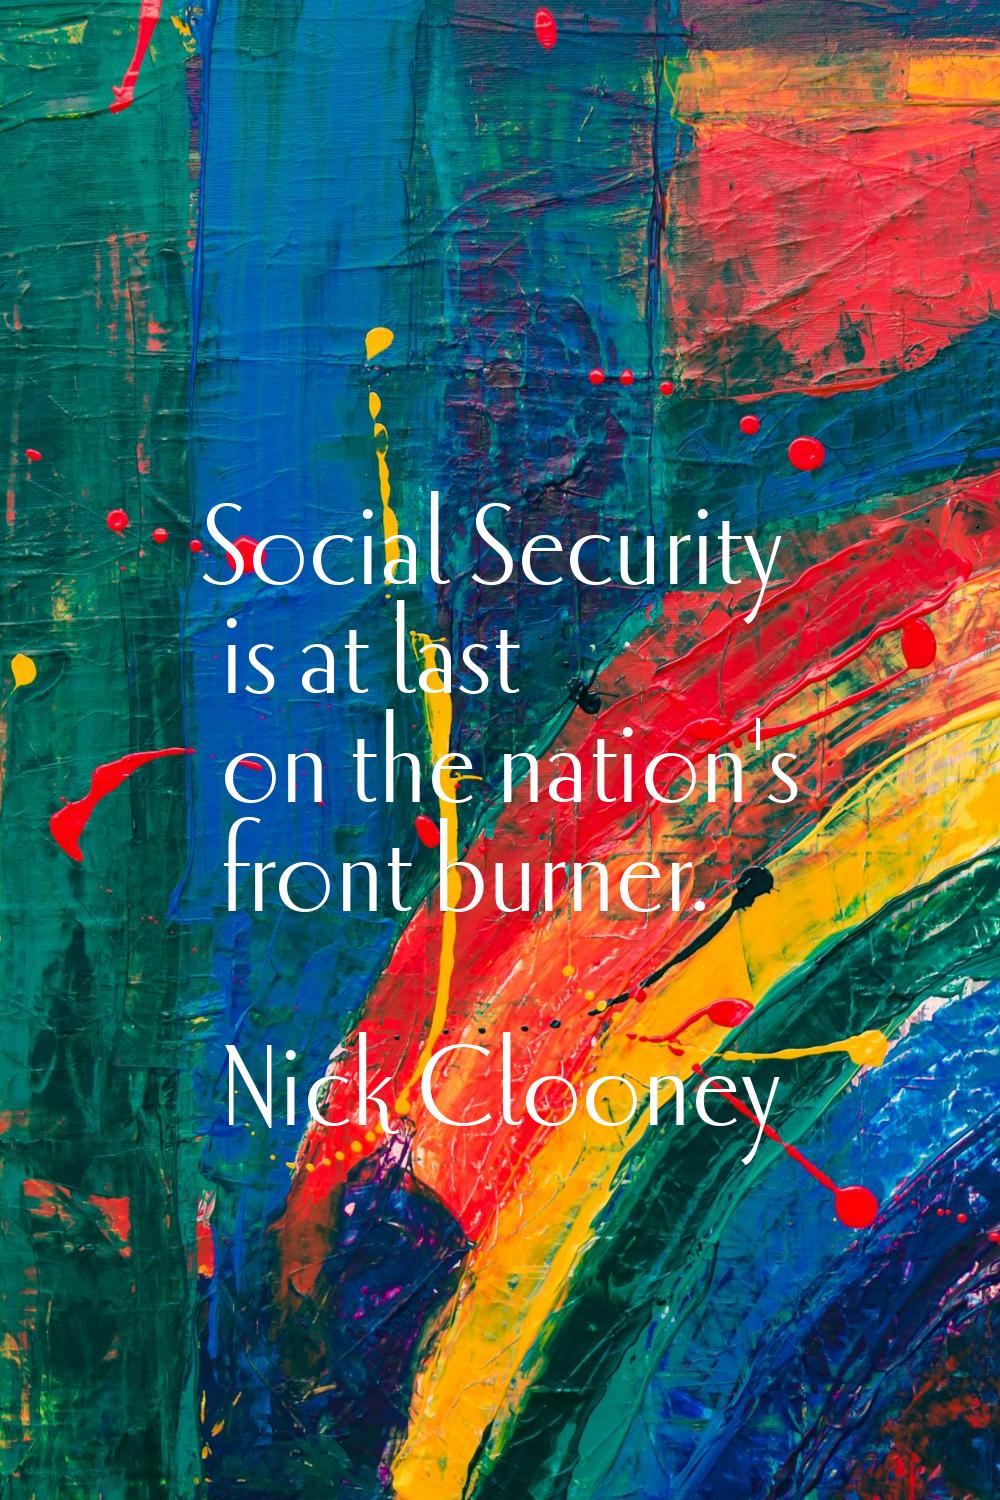 Social Security is at last on the nation's front burner.